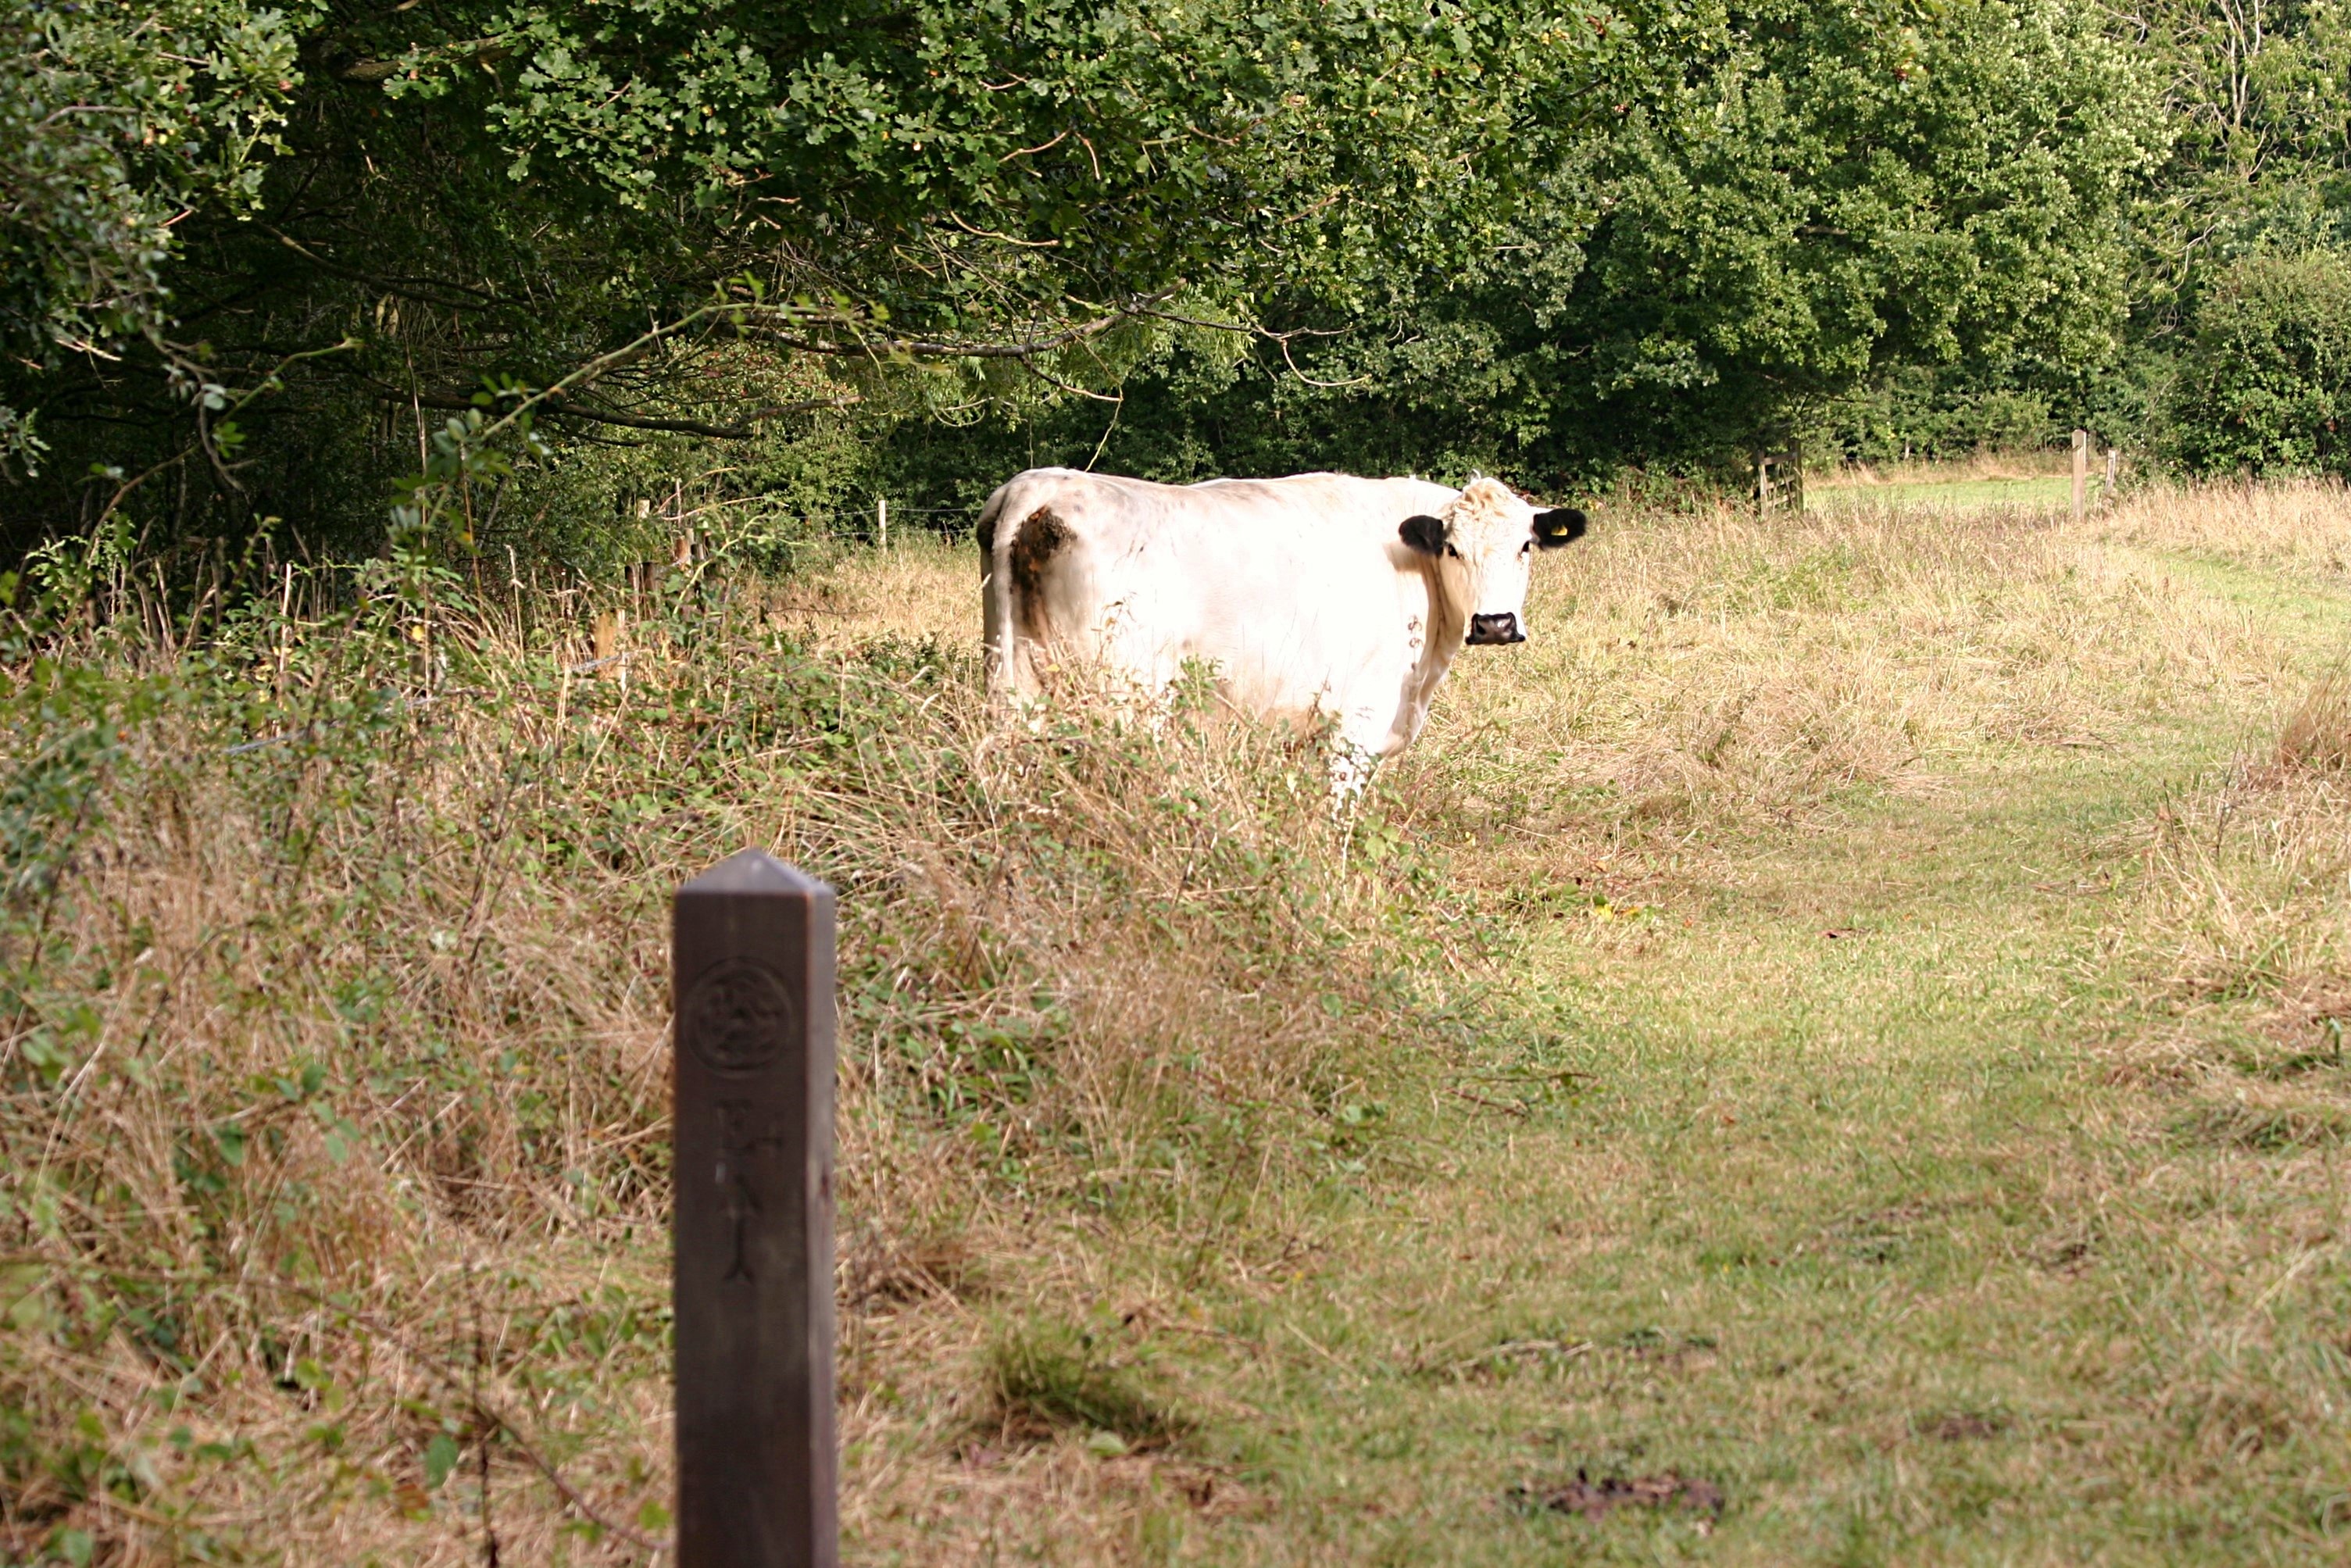 Meeting the cows on a weekend walk by Julie Kemp from Hasketon